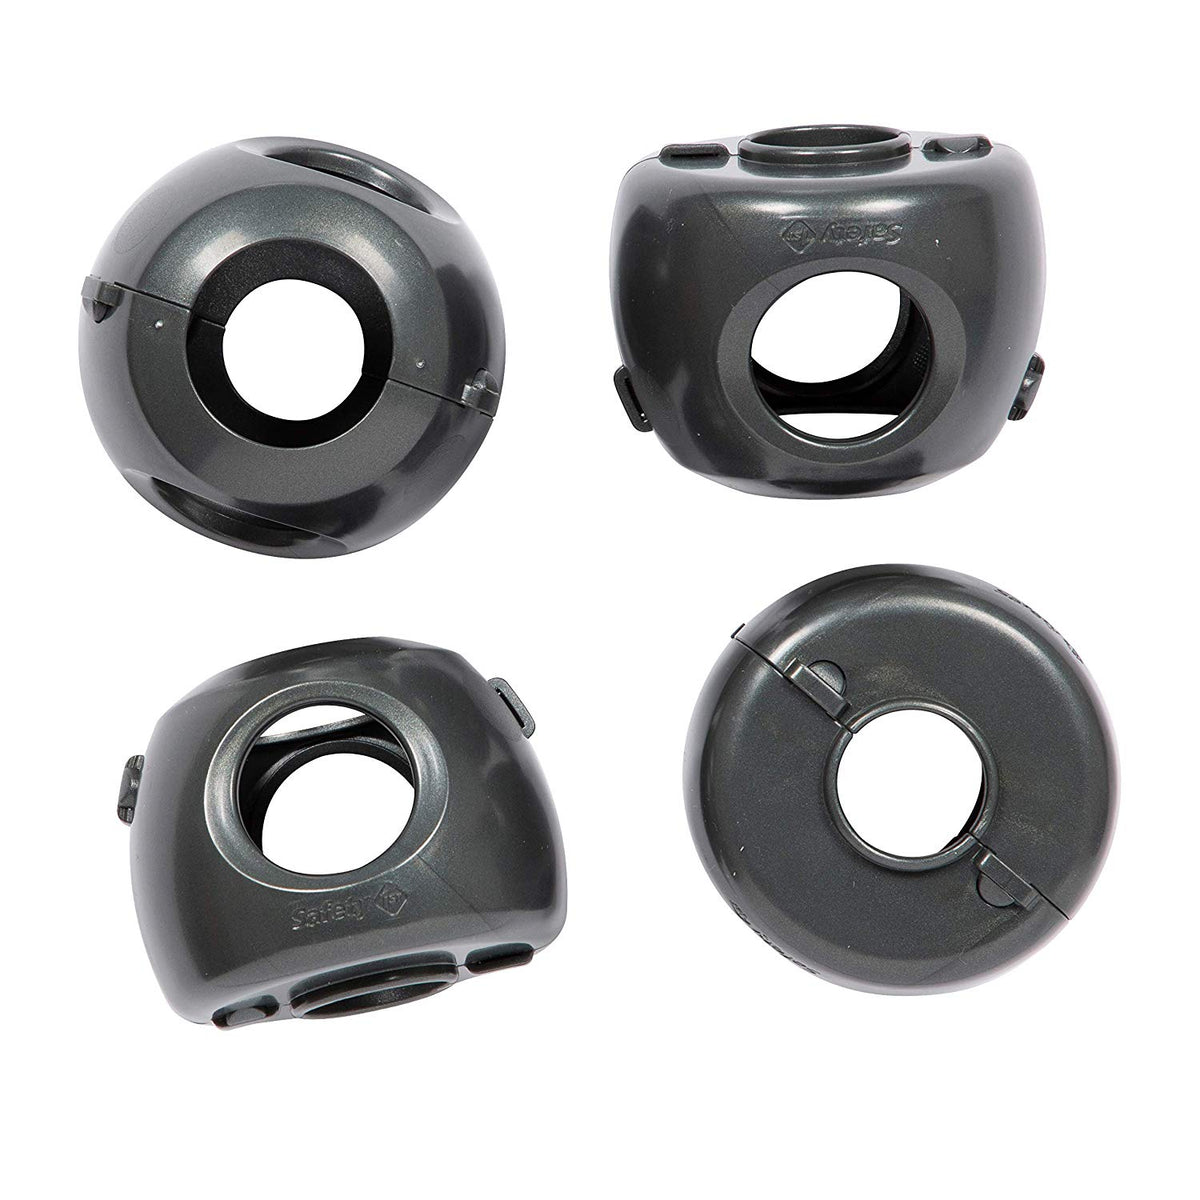 Safety 1st HS325 Parent Grip Door Knob Covers, Charcoal, 4 Pack